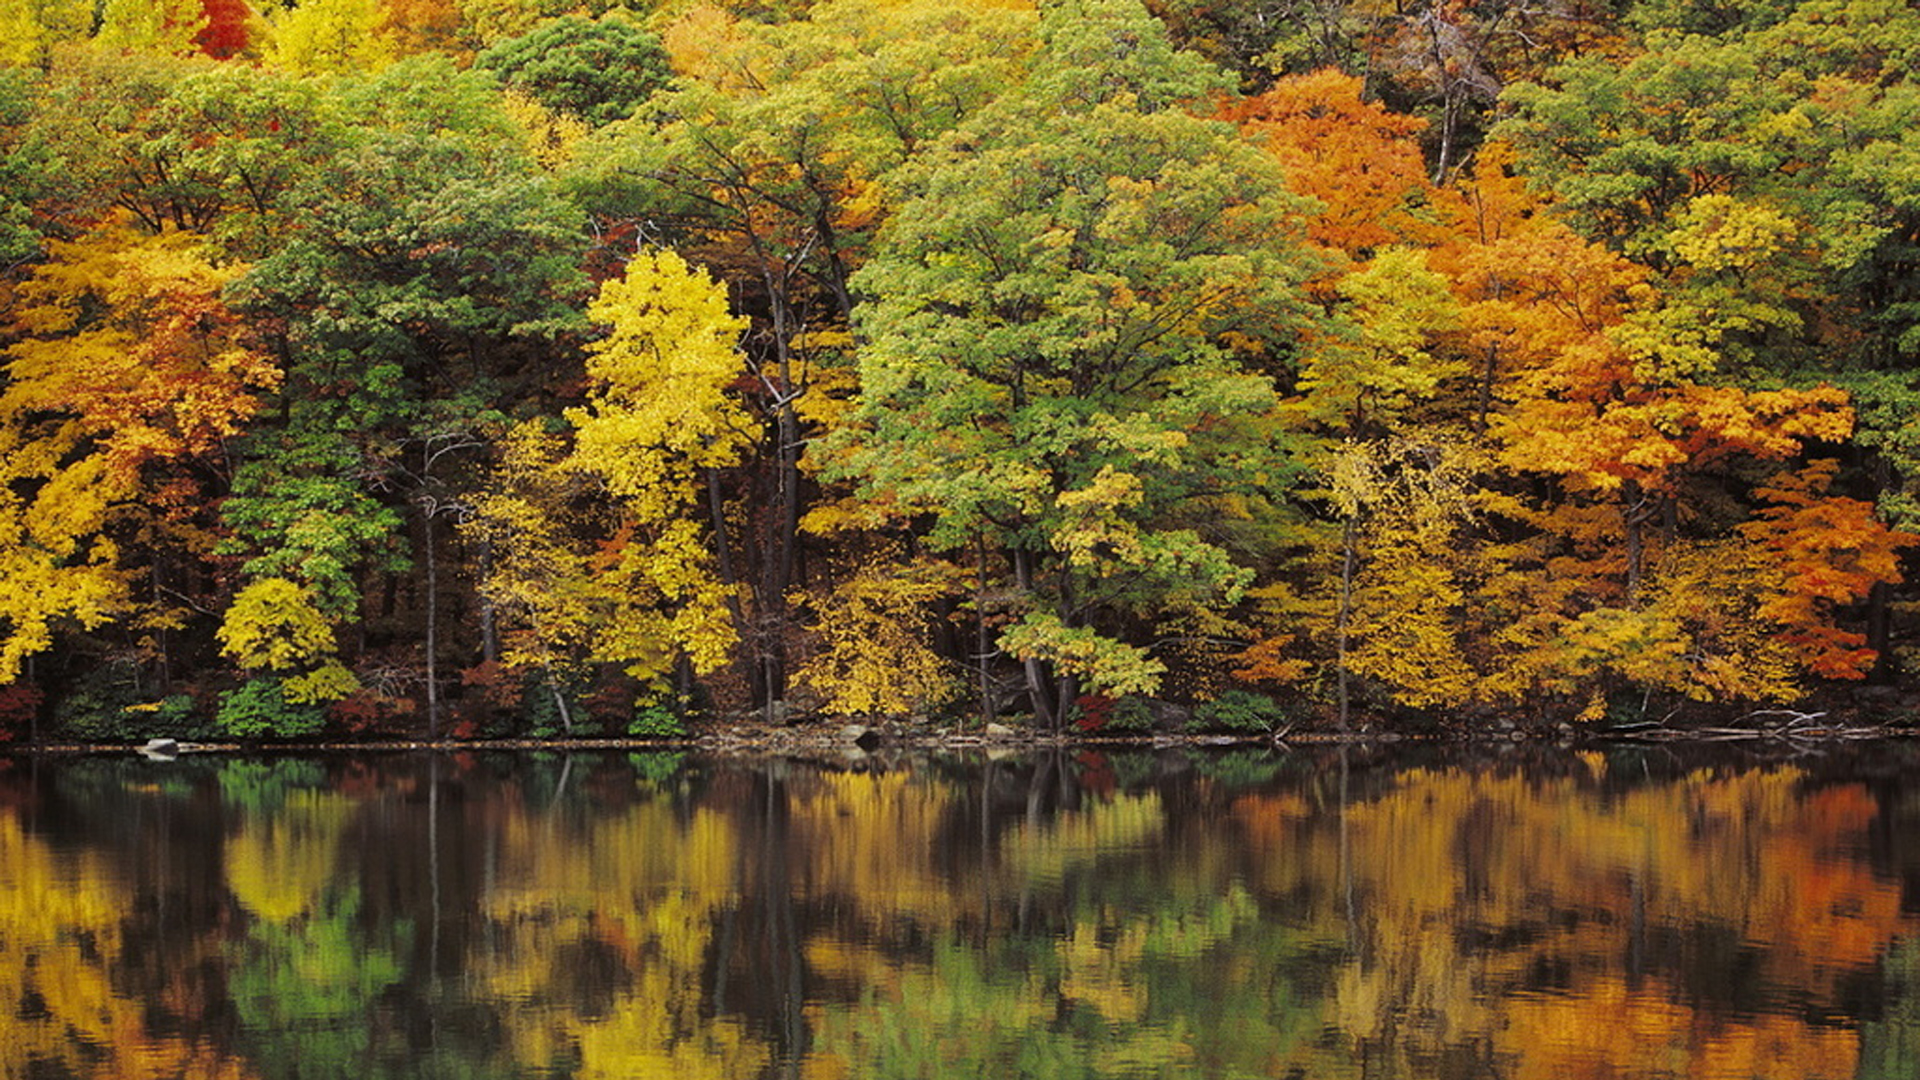 Green Yellow Orange Autumn Spring Leafed Trees Forest Reflection On Body Of Water HD Nature